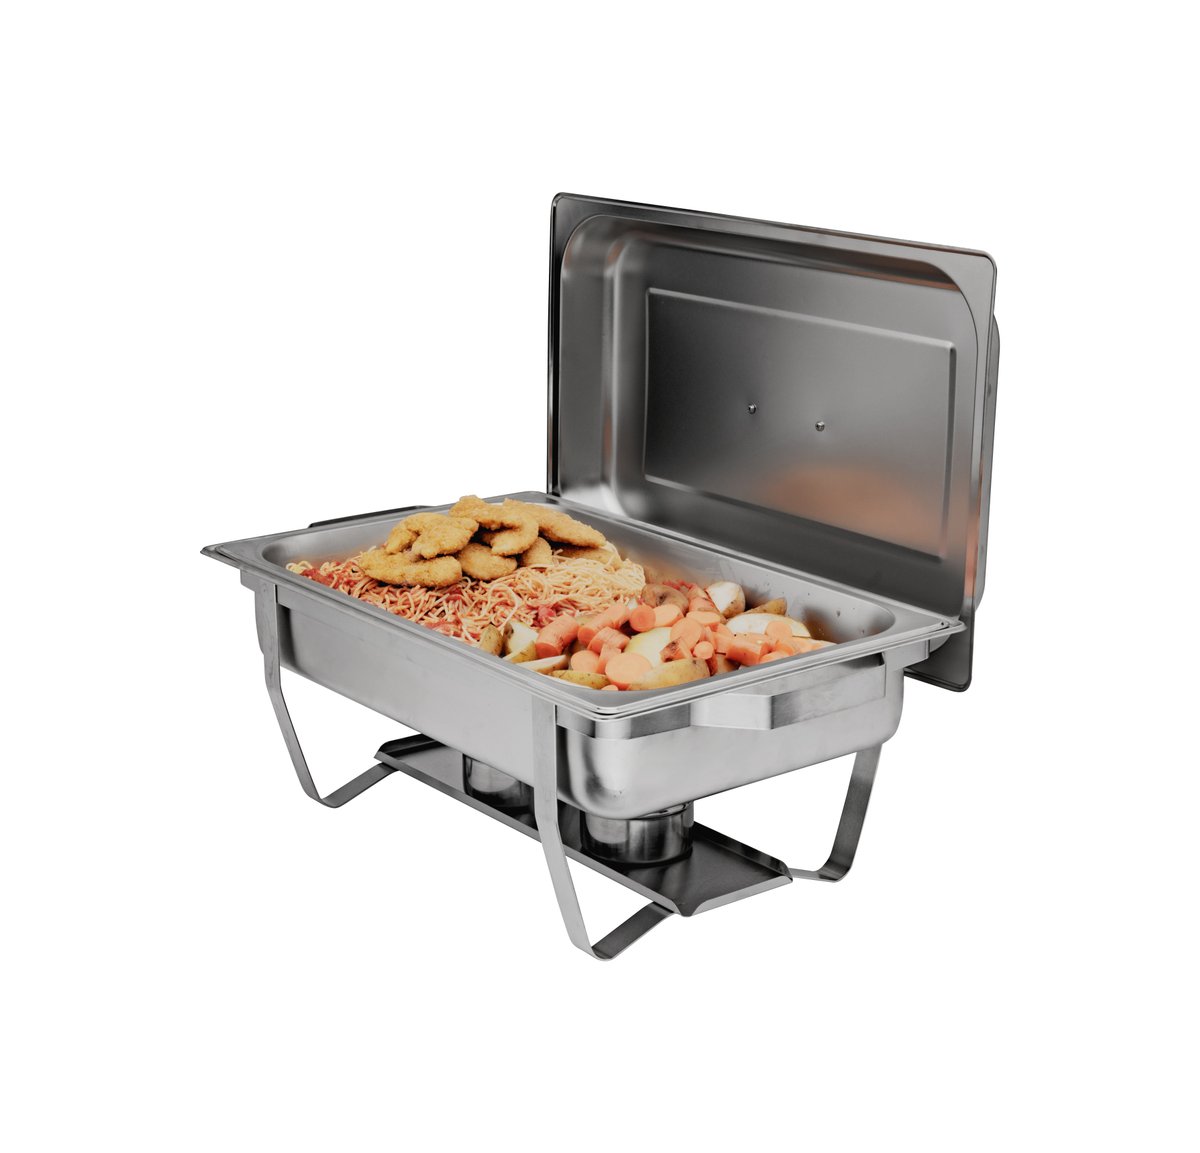 Browne 575126 Full-Size Economy Chafer